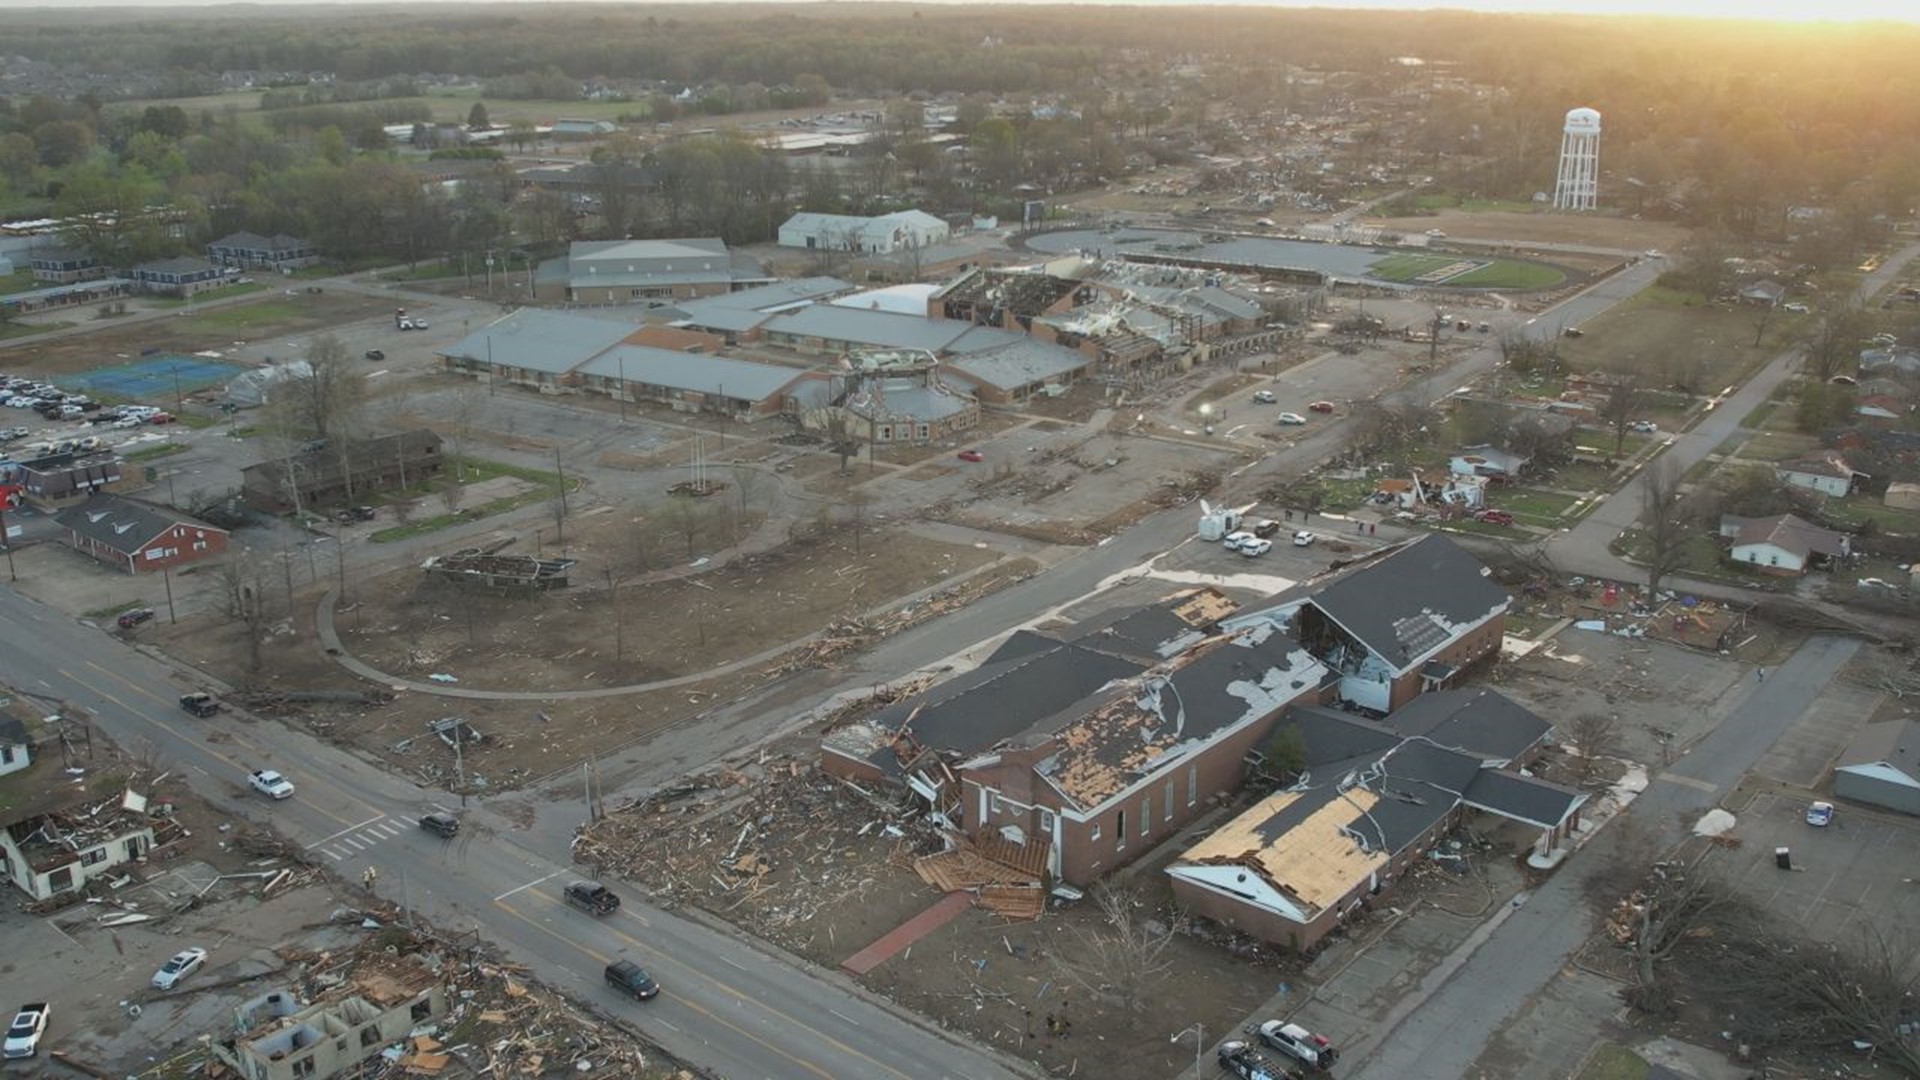 This drone video shows the devastation from a tornado in Wynne, Arkansas that led to the loss of at least four lives.